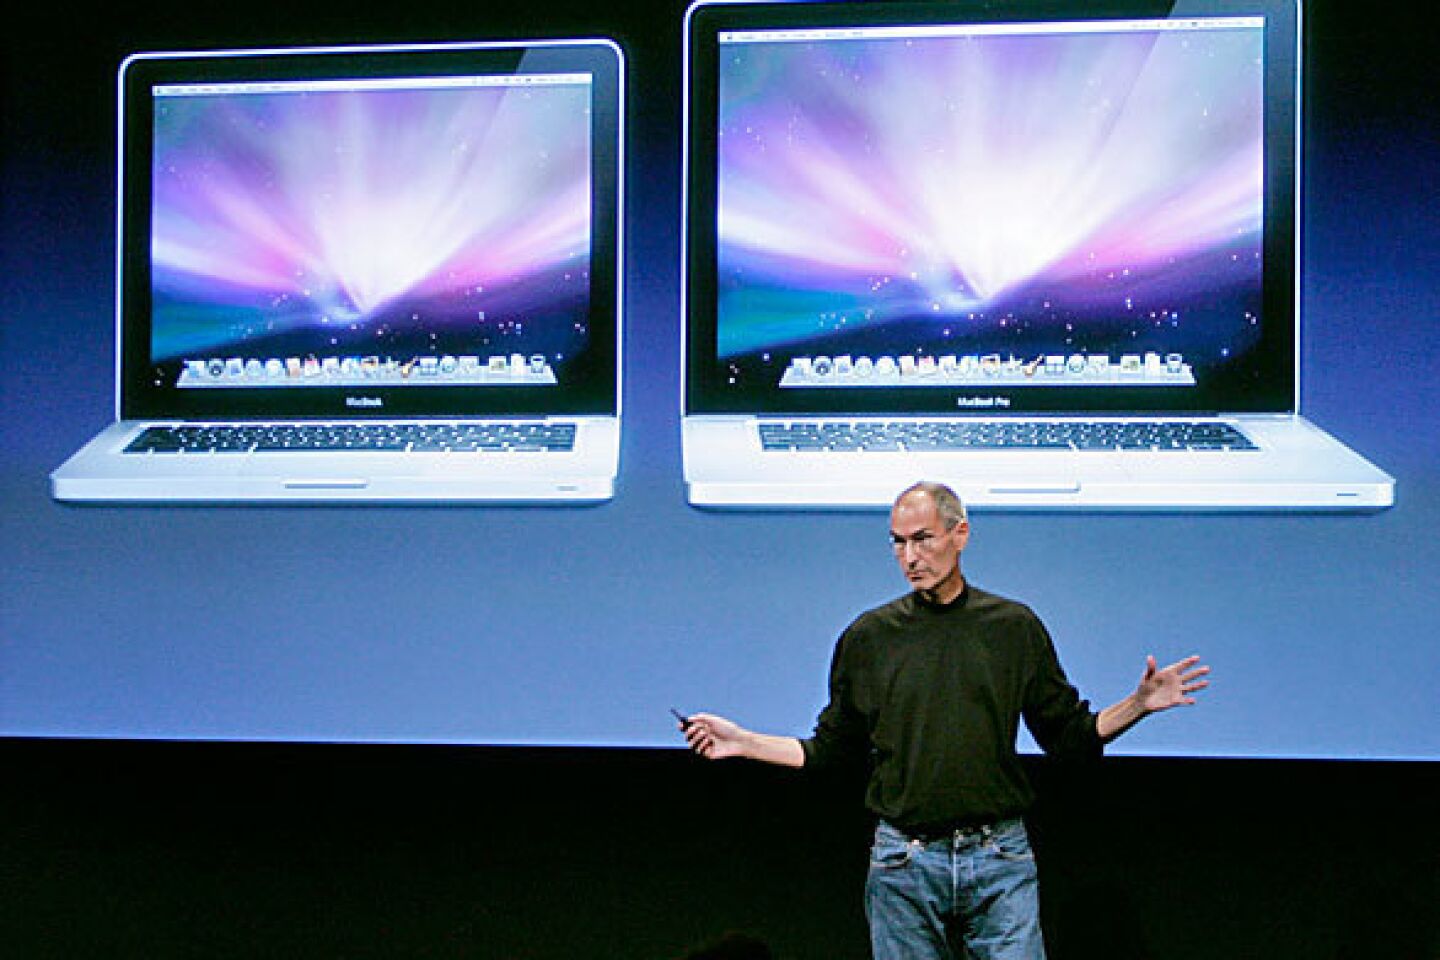 Jobs introduces new versions of the MacBook, left, and MacBook Pro at Apple headquarters in Cupertino, Calif.